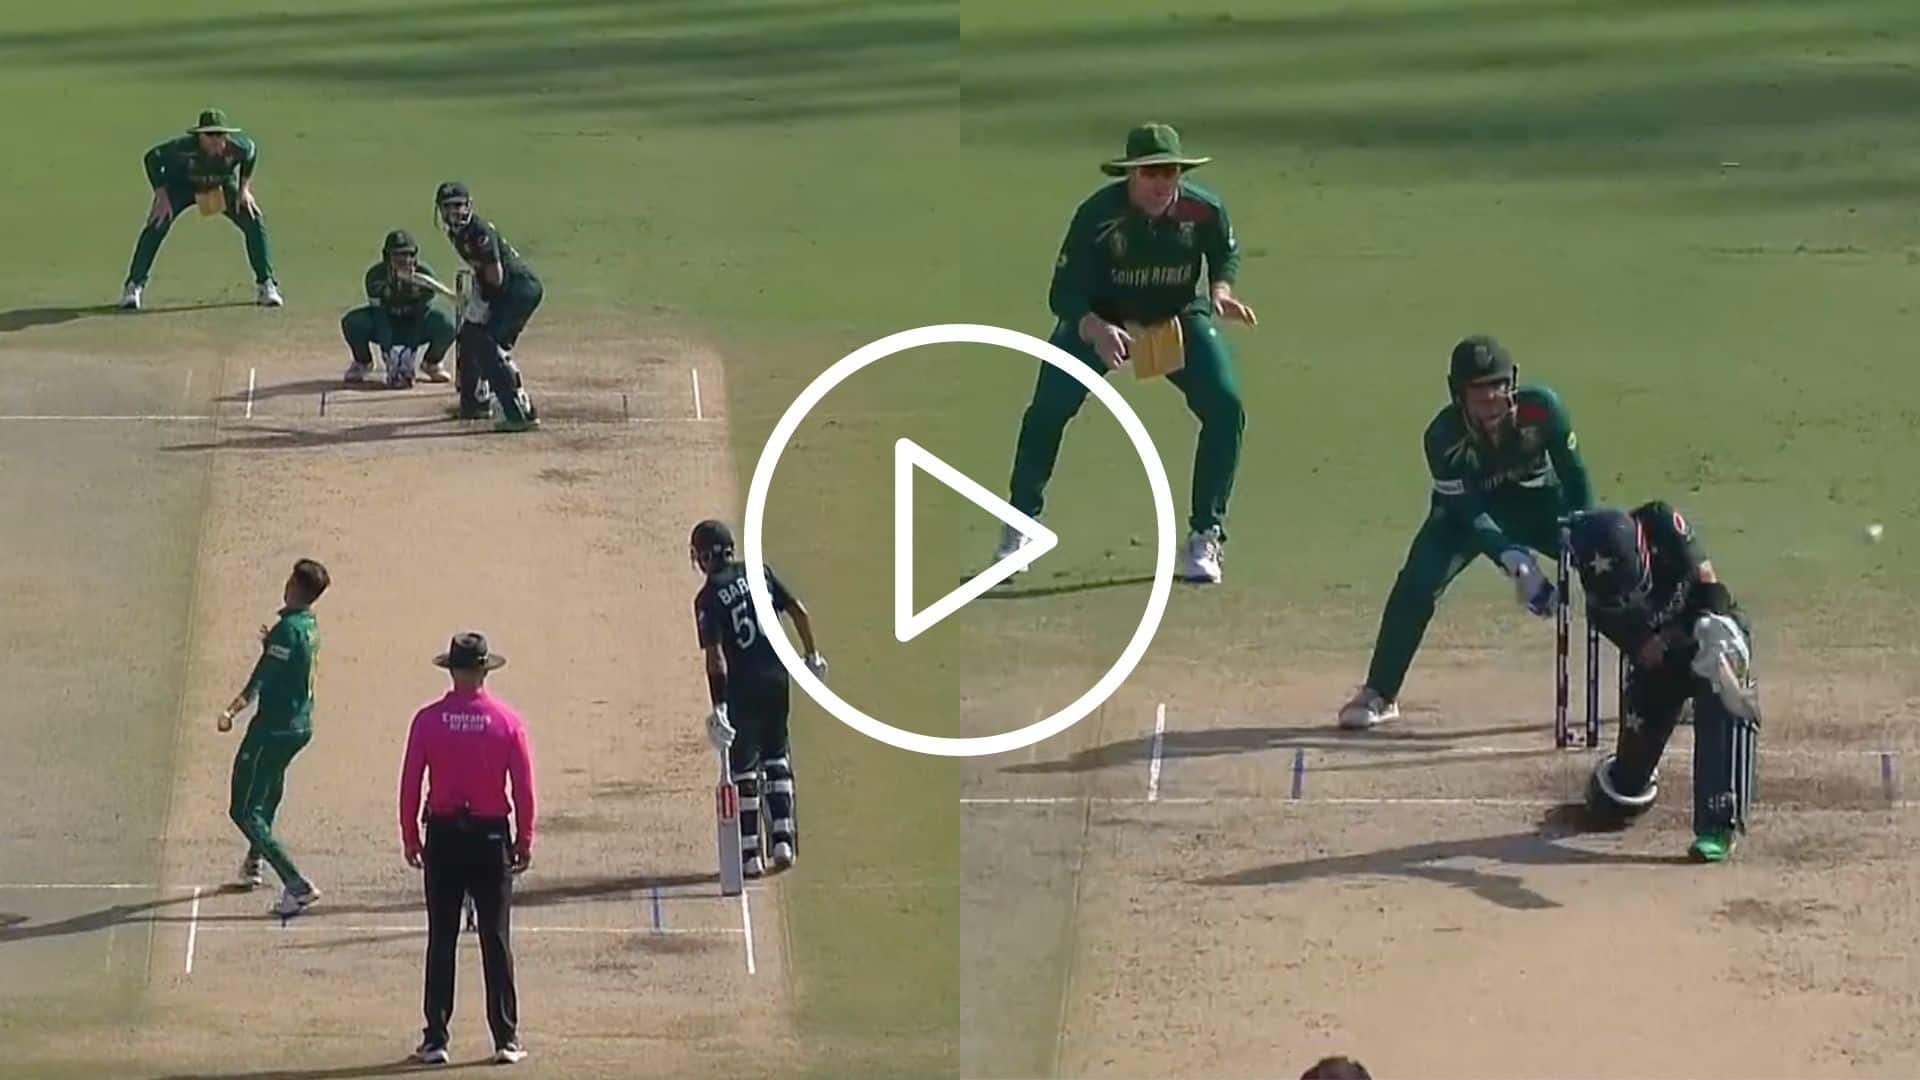 [Watch] Mohammad Rizwan Sends Keshav Maharaj Into The Stands With ‘Monstrous’ Six